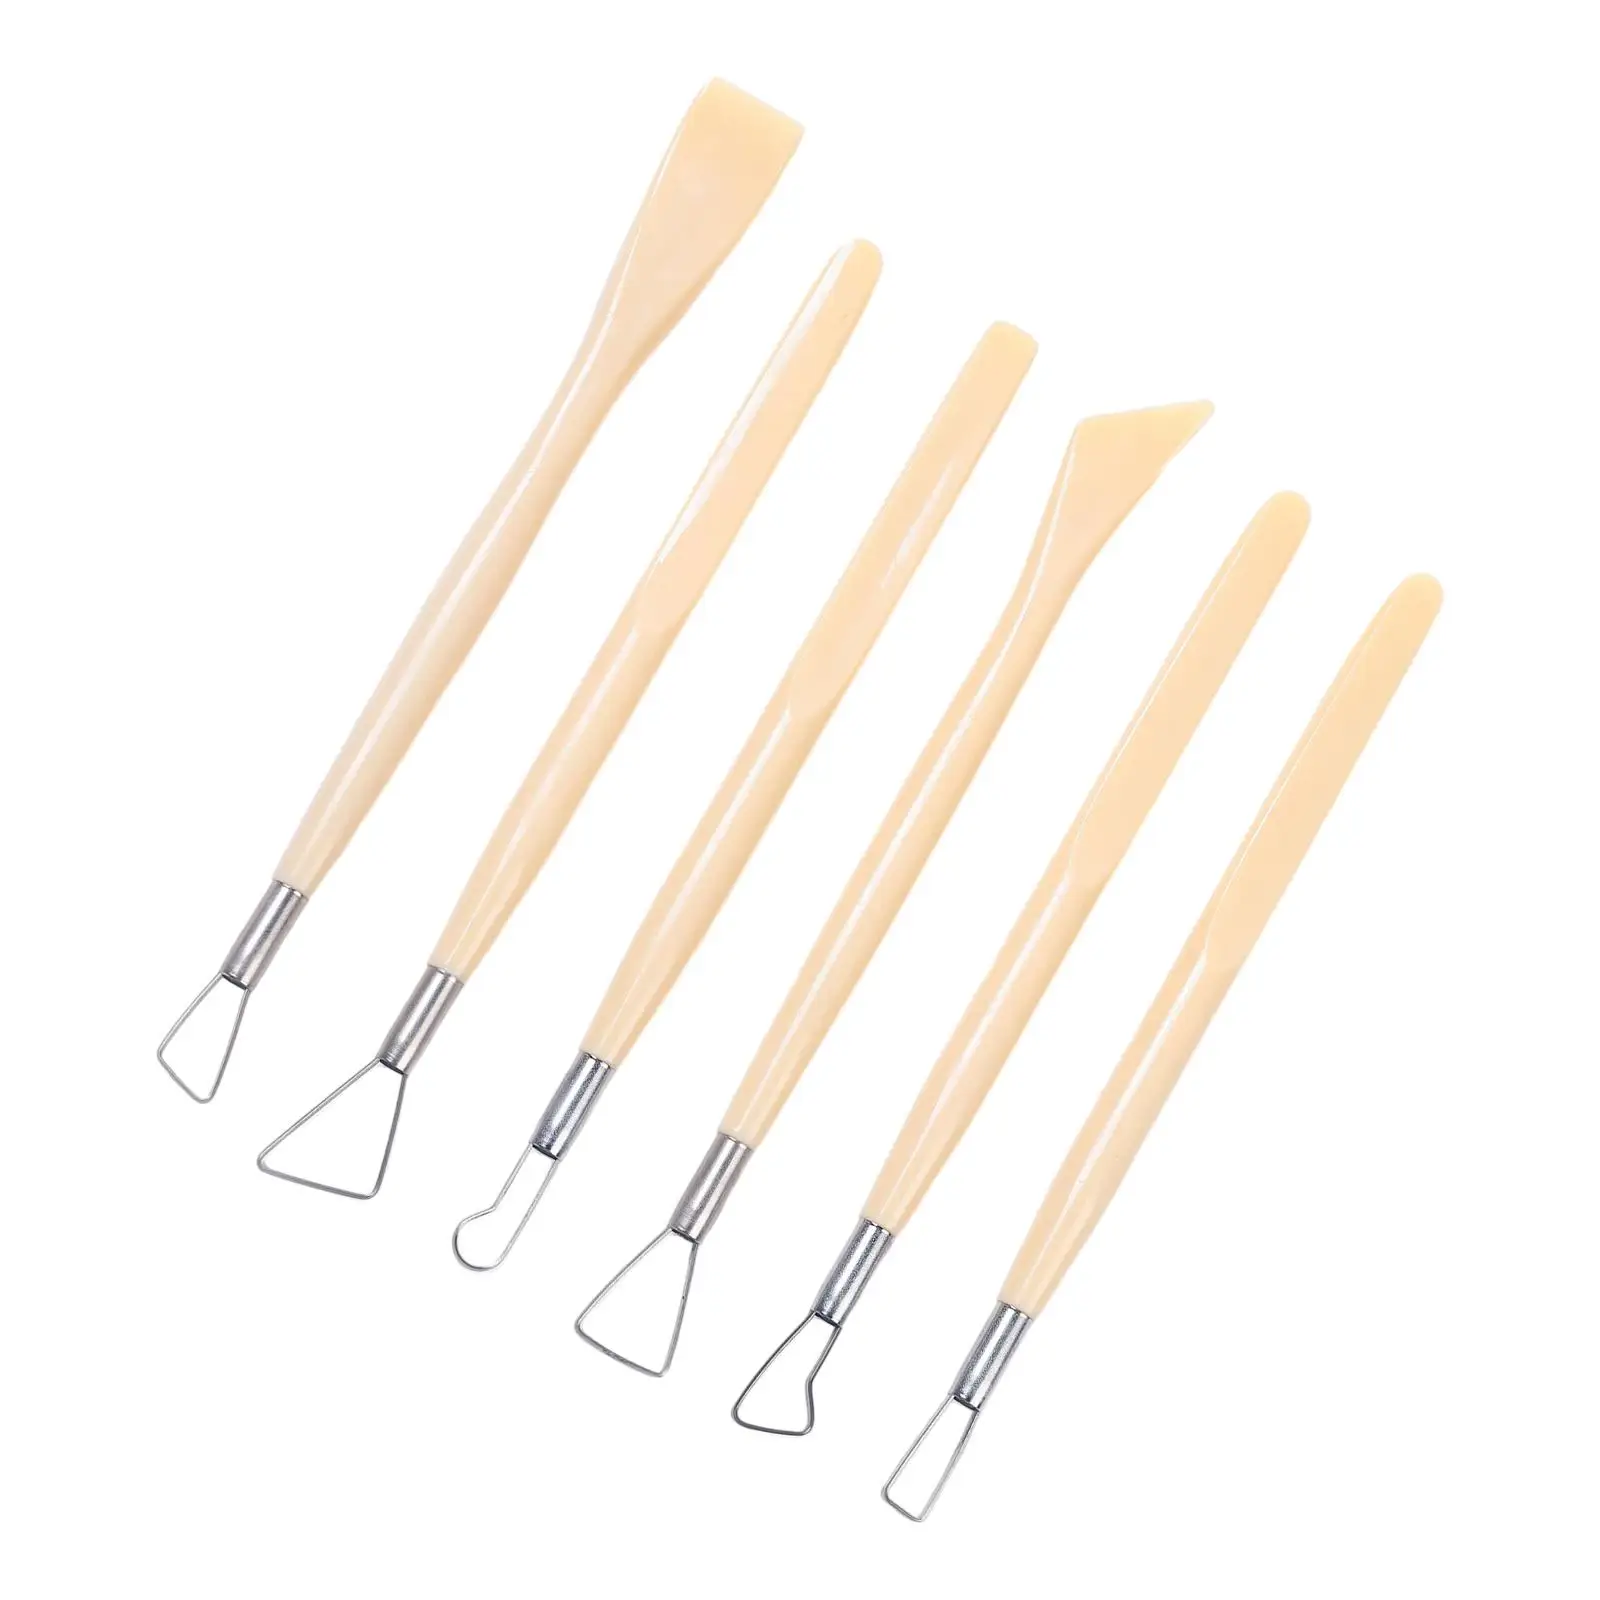 Pack of 6 Double Ended Modeling Sculpting Tool Multipurpose Accessories Durable with Different Tips for Detailing and Trimming